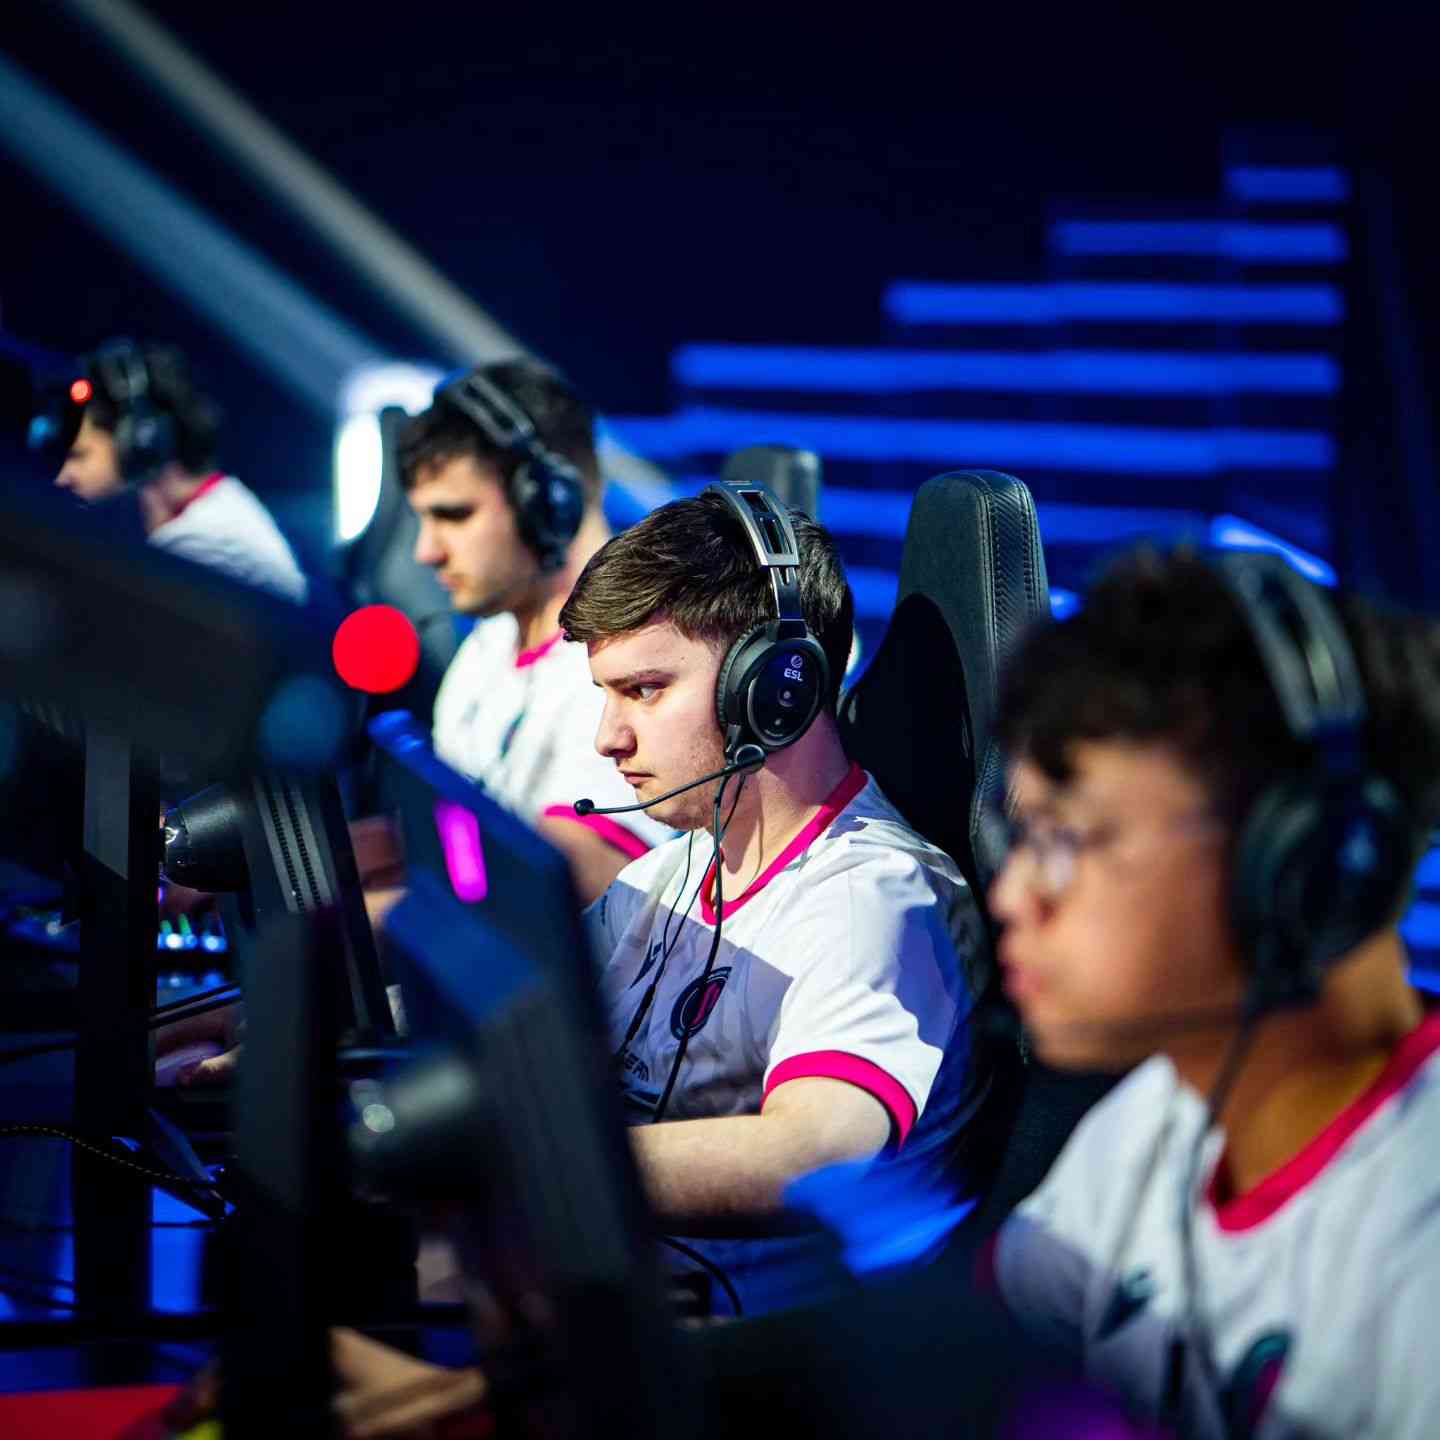 BDS competing in Gamers8 (Image Credits: Instagram/bds_esports)